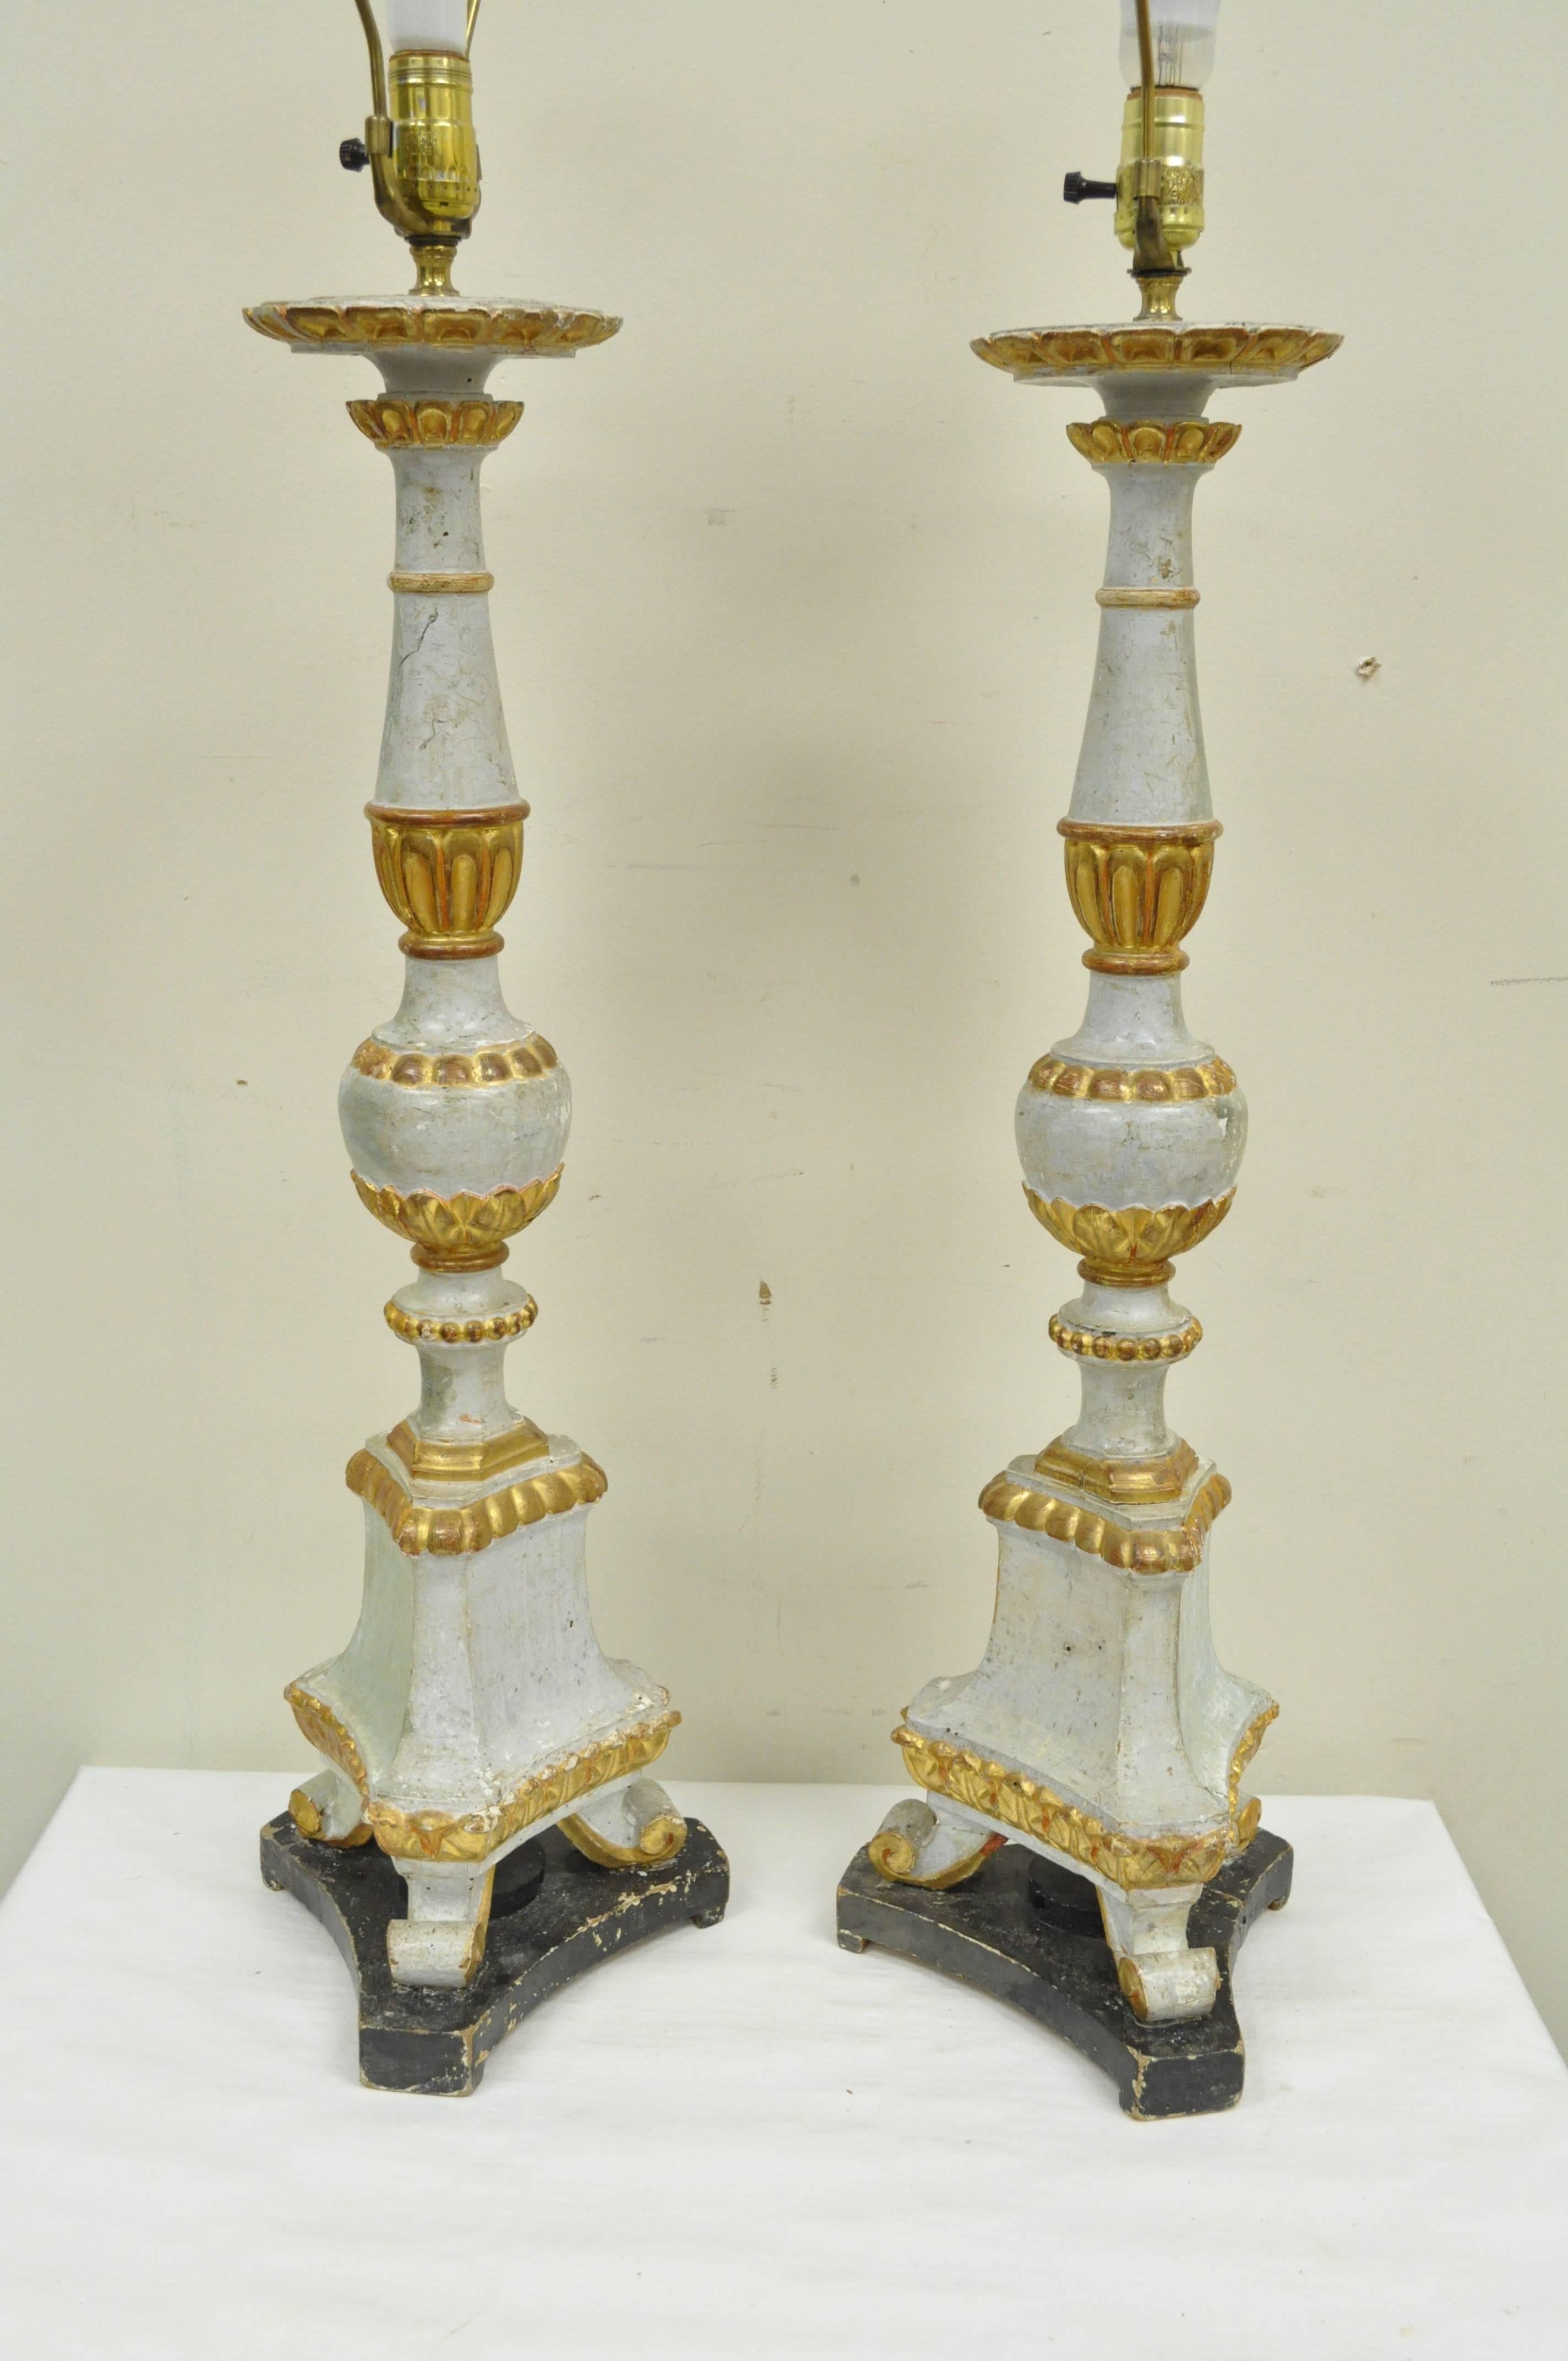 Pair of Early 20th Century Italian Hand-Carved Giltwood Neoclassical Table Lamps For Sale 1